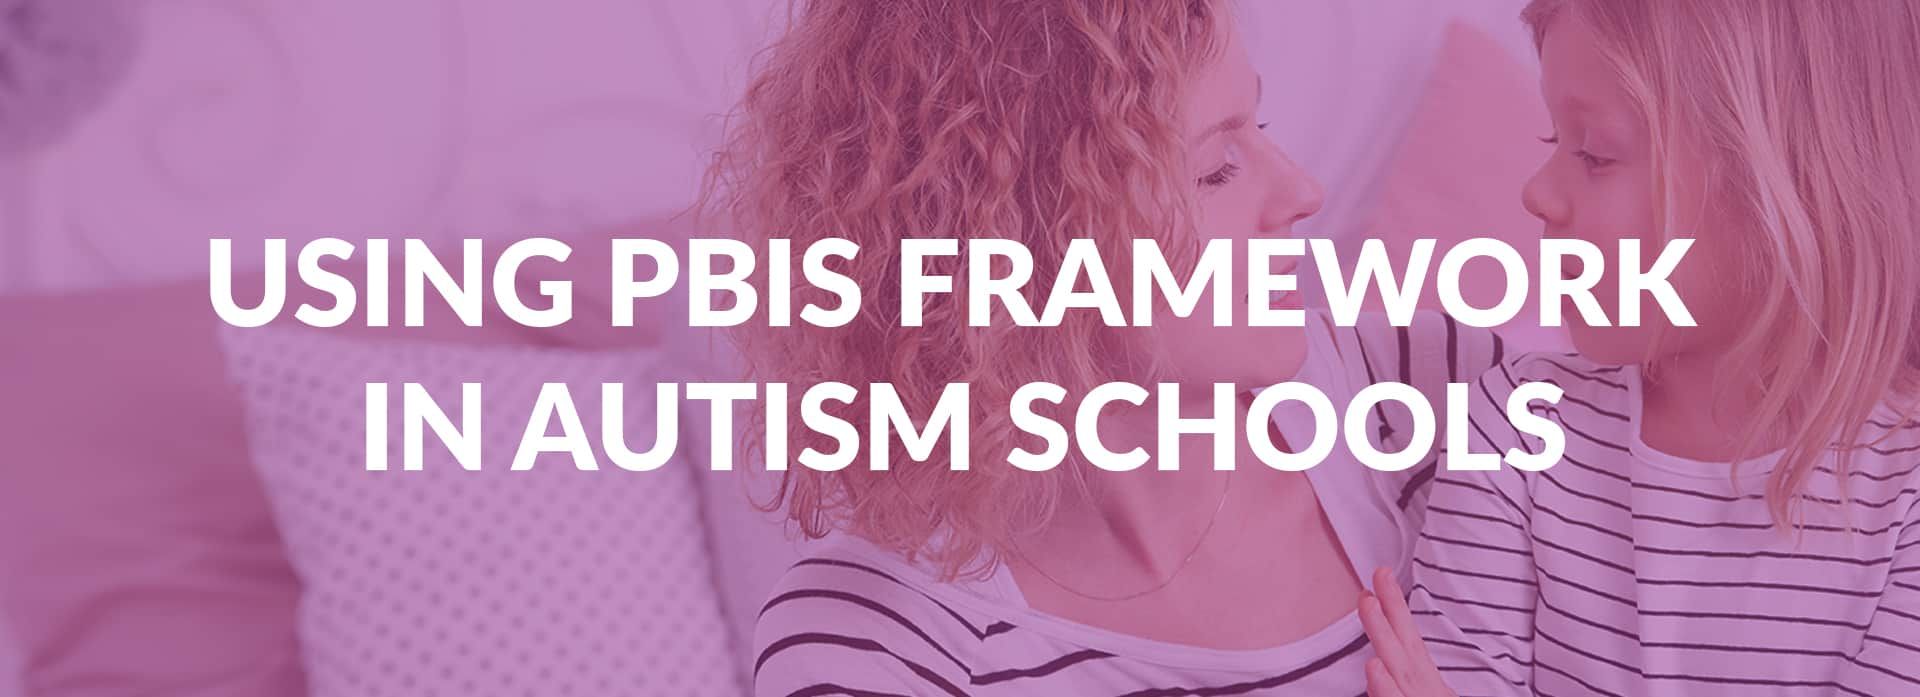 Using The PBIS Approach To Improve Behavior In Autism Schools Using The PBIS Approach To Improve Behavior In Autism Schools Using The PBIS Approach To Improve Behavior In Autism Schools Using The PBIS Approach To Improve Behavior In Autism Schools